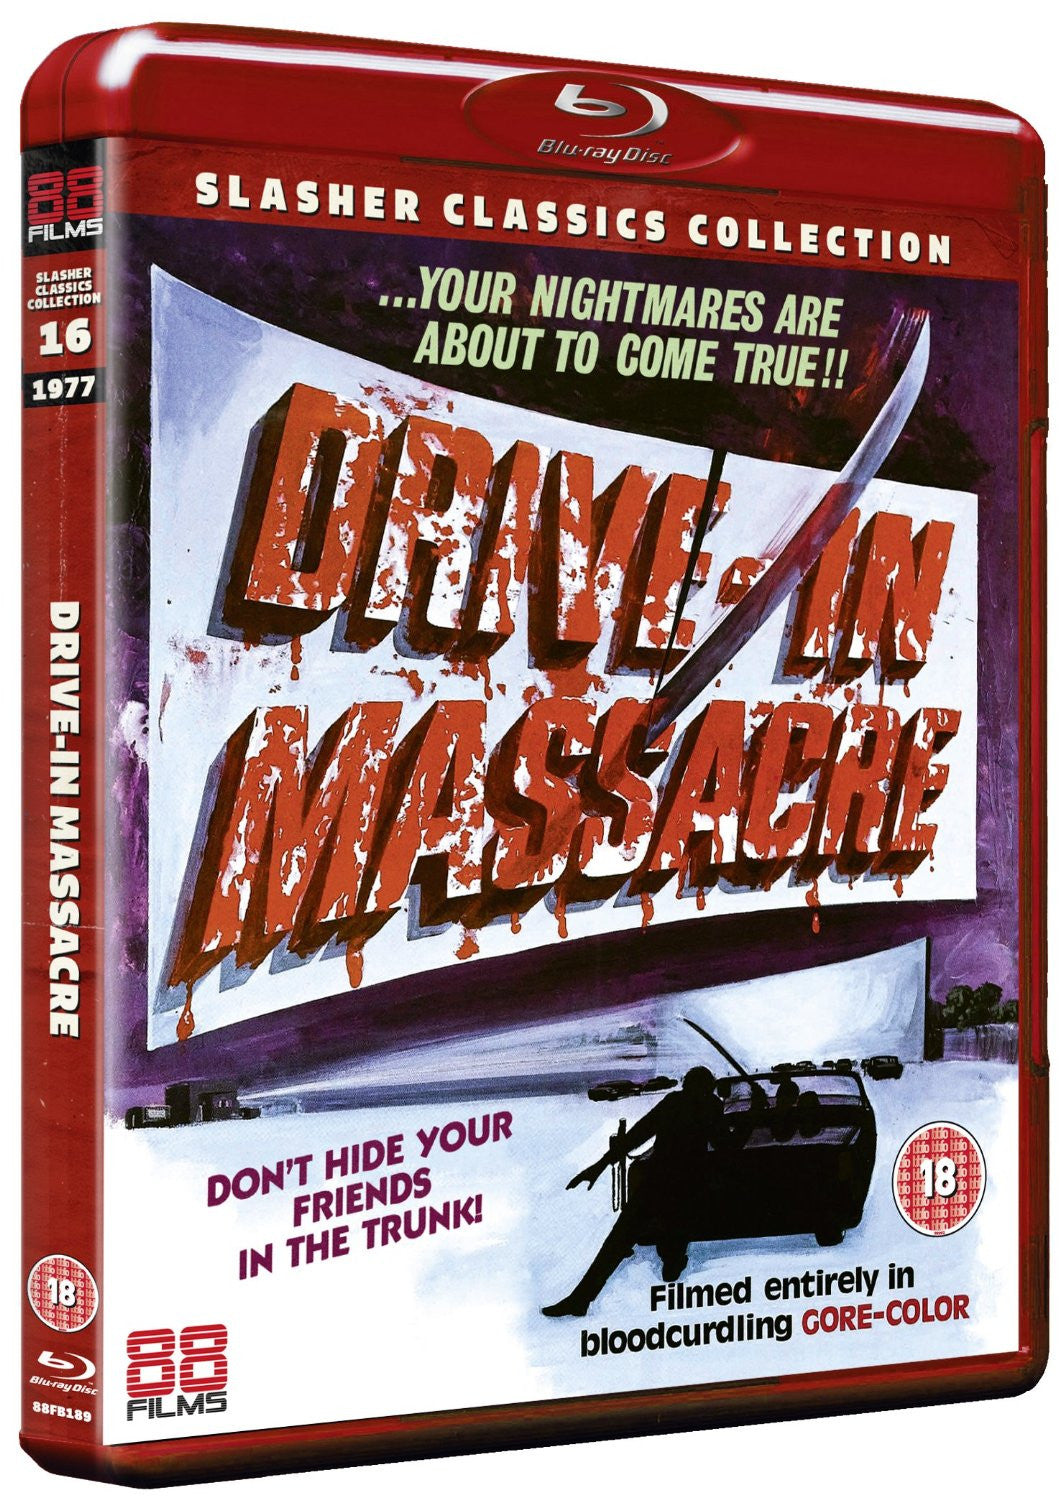 Drive-In Massacre (Blu-ray) - Slasher Classic Collection 20